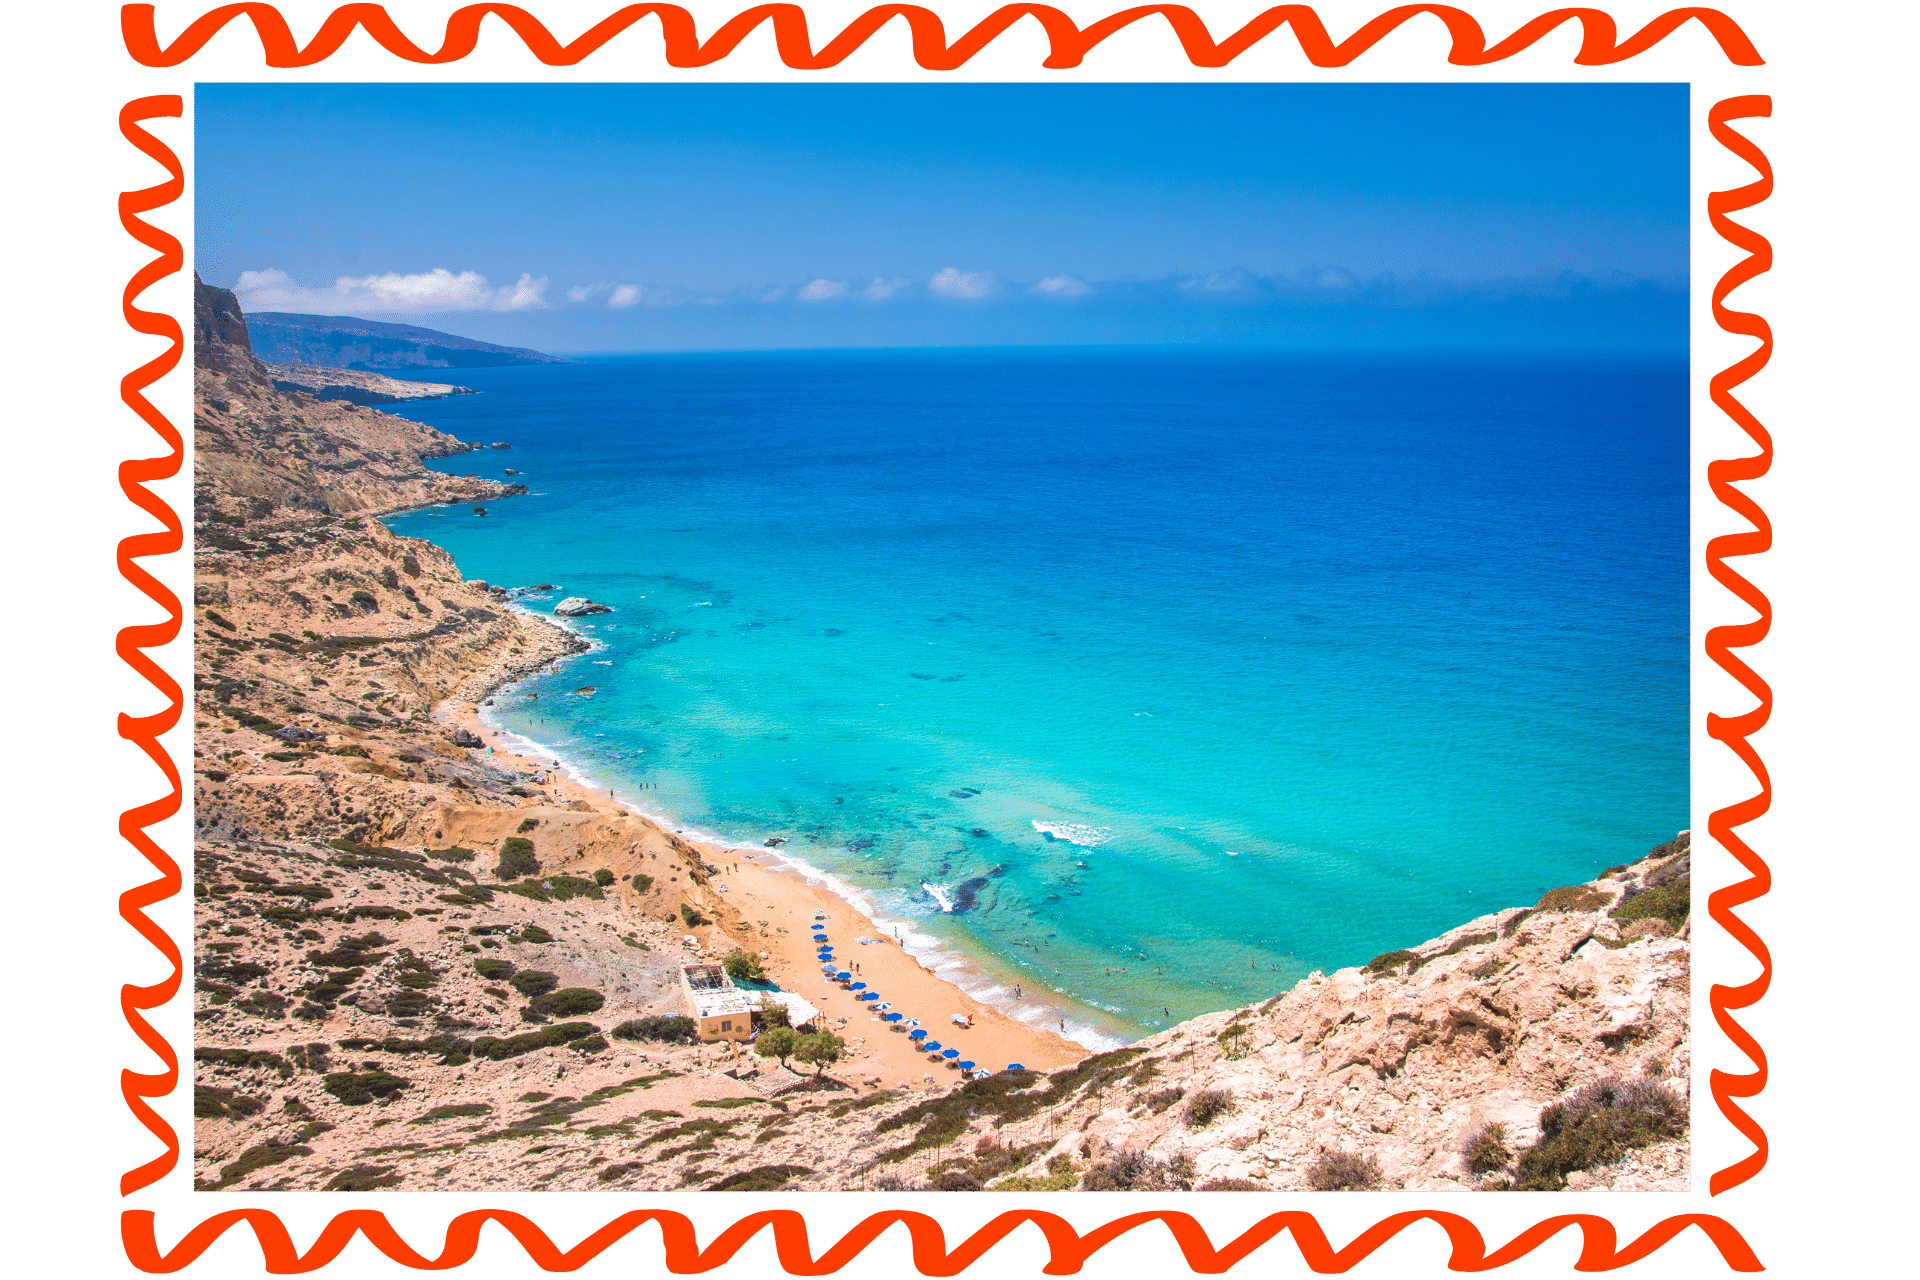 Red Beach, in Crete, is one of the world's best nudist beaches. A rocky coastline, with a small strip of sand, meets an intensely blue sea.